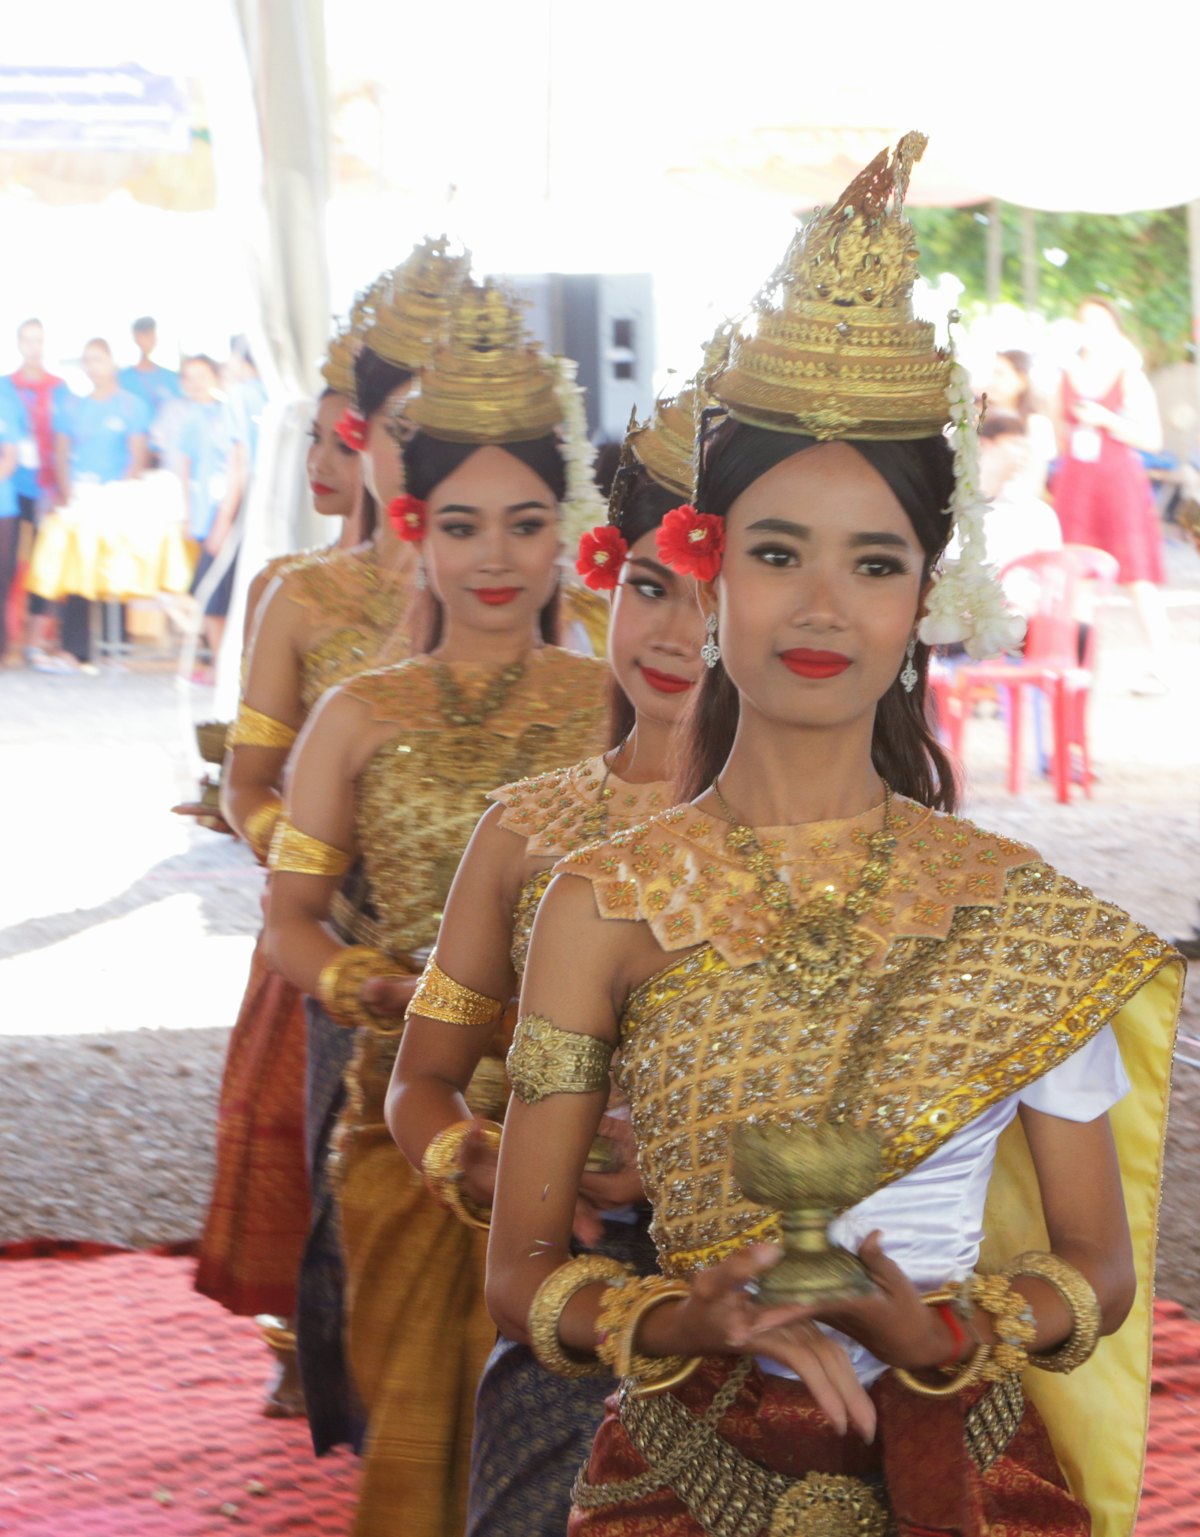 The vibrant colors, music, and splendor of Cambodia's culture were on display during the morning's program, which began with devotions and a traditional dance.